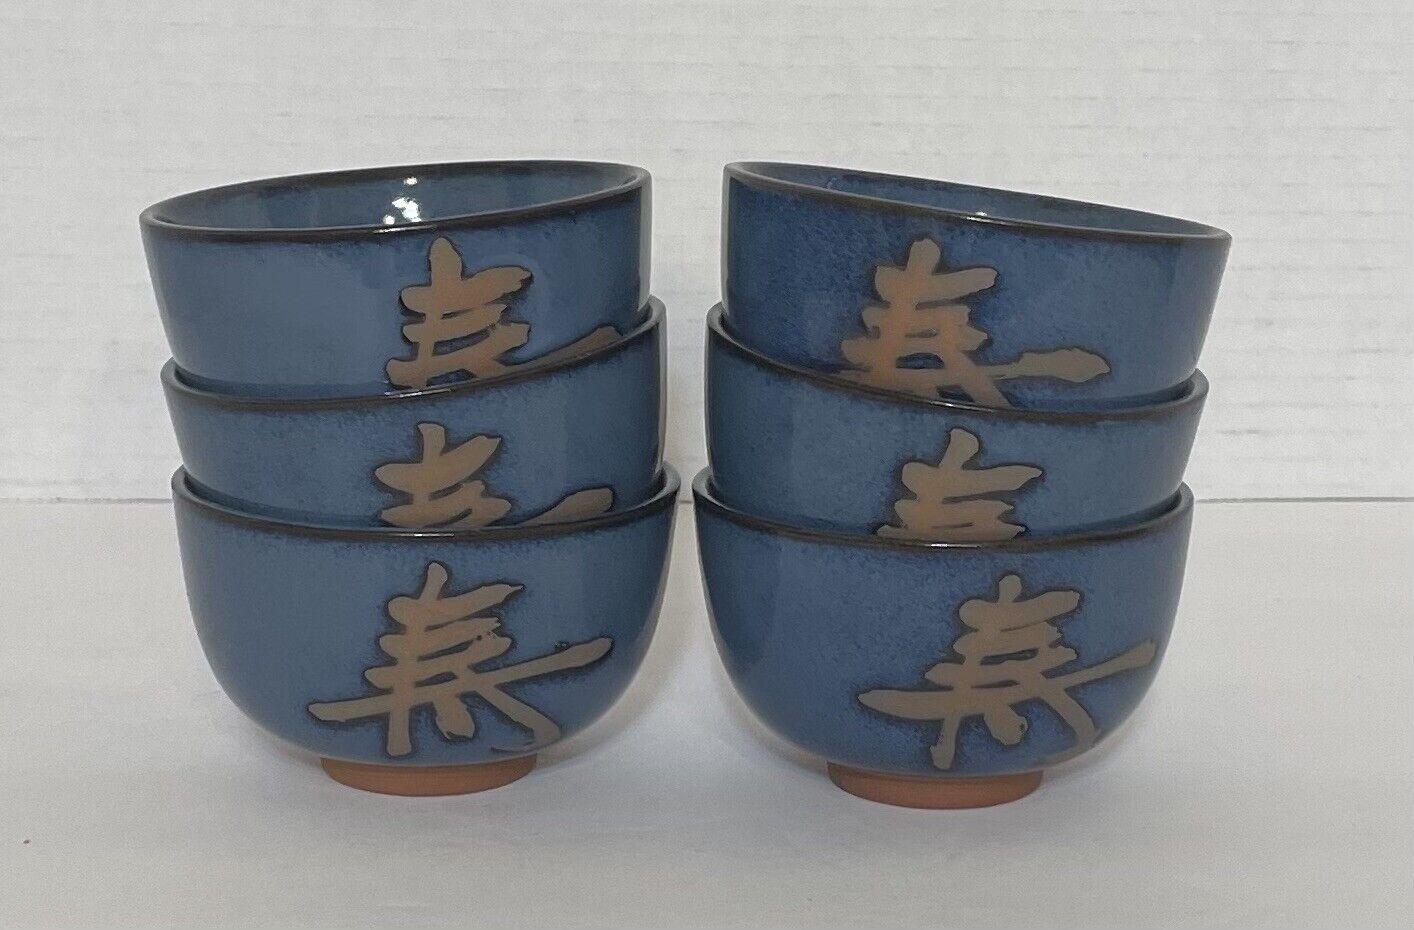 (6) New Pier 1 Japanese Chinese Sake Tea Cups Blue Red Clay Base Set Of 6